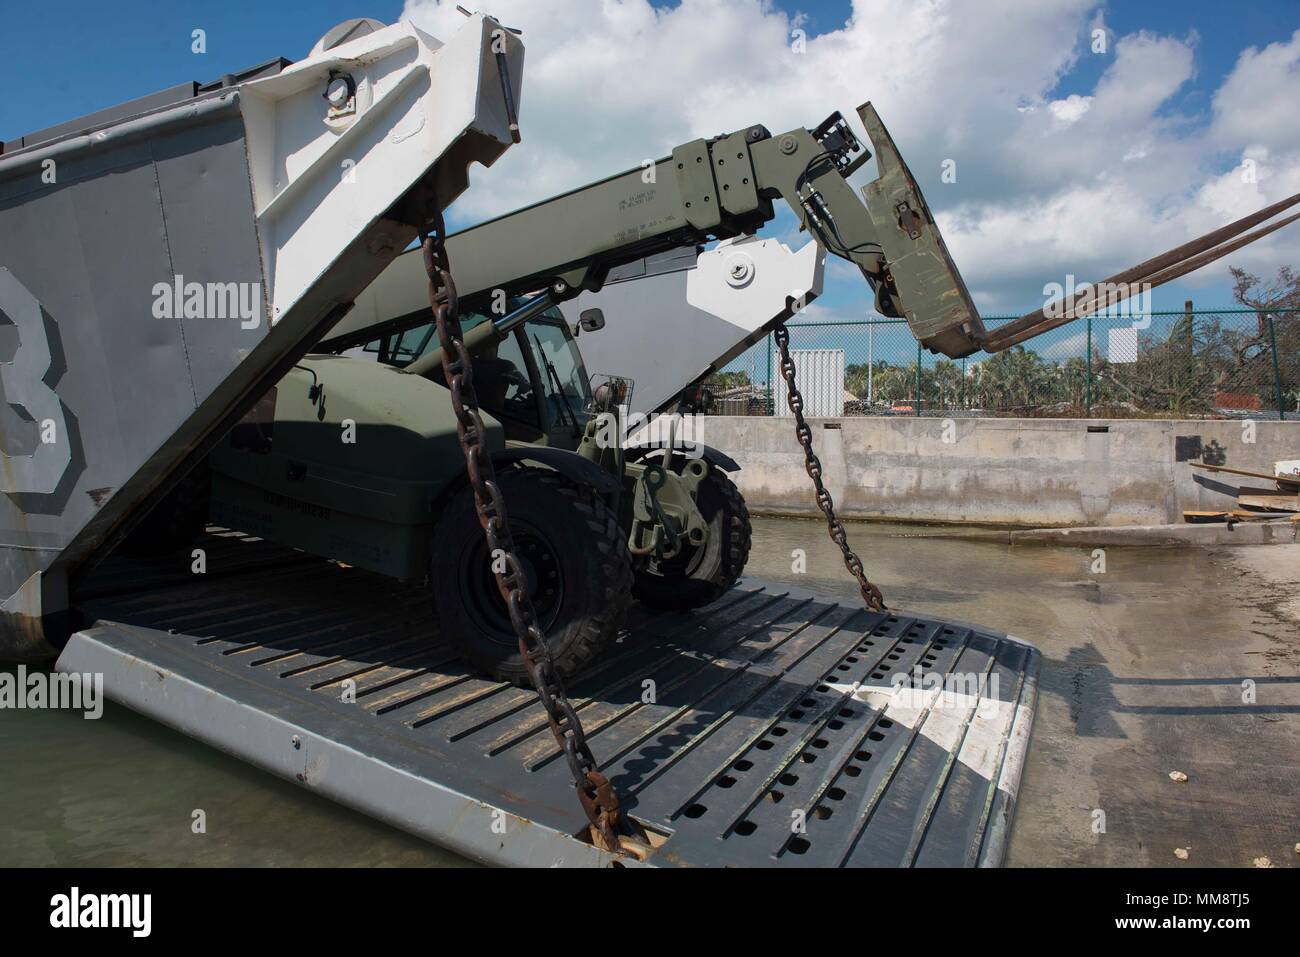 170913-N-DS065-0150 KEY WEST, Fla. (Sept. 13, 2017) A forklift tows equipment off a Landing Craft Unit attached to Assault Craft Unit (ACU) 2, to use in humanitarian assistance efforts in Key West, Fla., following Hurricane Irma’s landfall in Key West. The Department of Defense is supporting Federal Emergency Management Agency, the lead agency, in helping those affixed by Hurricane Irma to minimize suffering and as one component of the overall whole-of-government response efforts. (U.S. Navy photo by Mass Communication Specialist 3rd Class Evan A. Denny/Released) Stock Photo